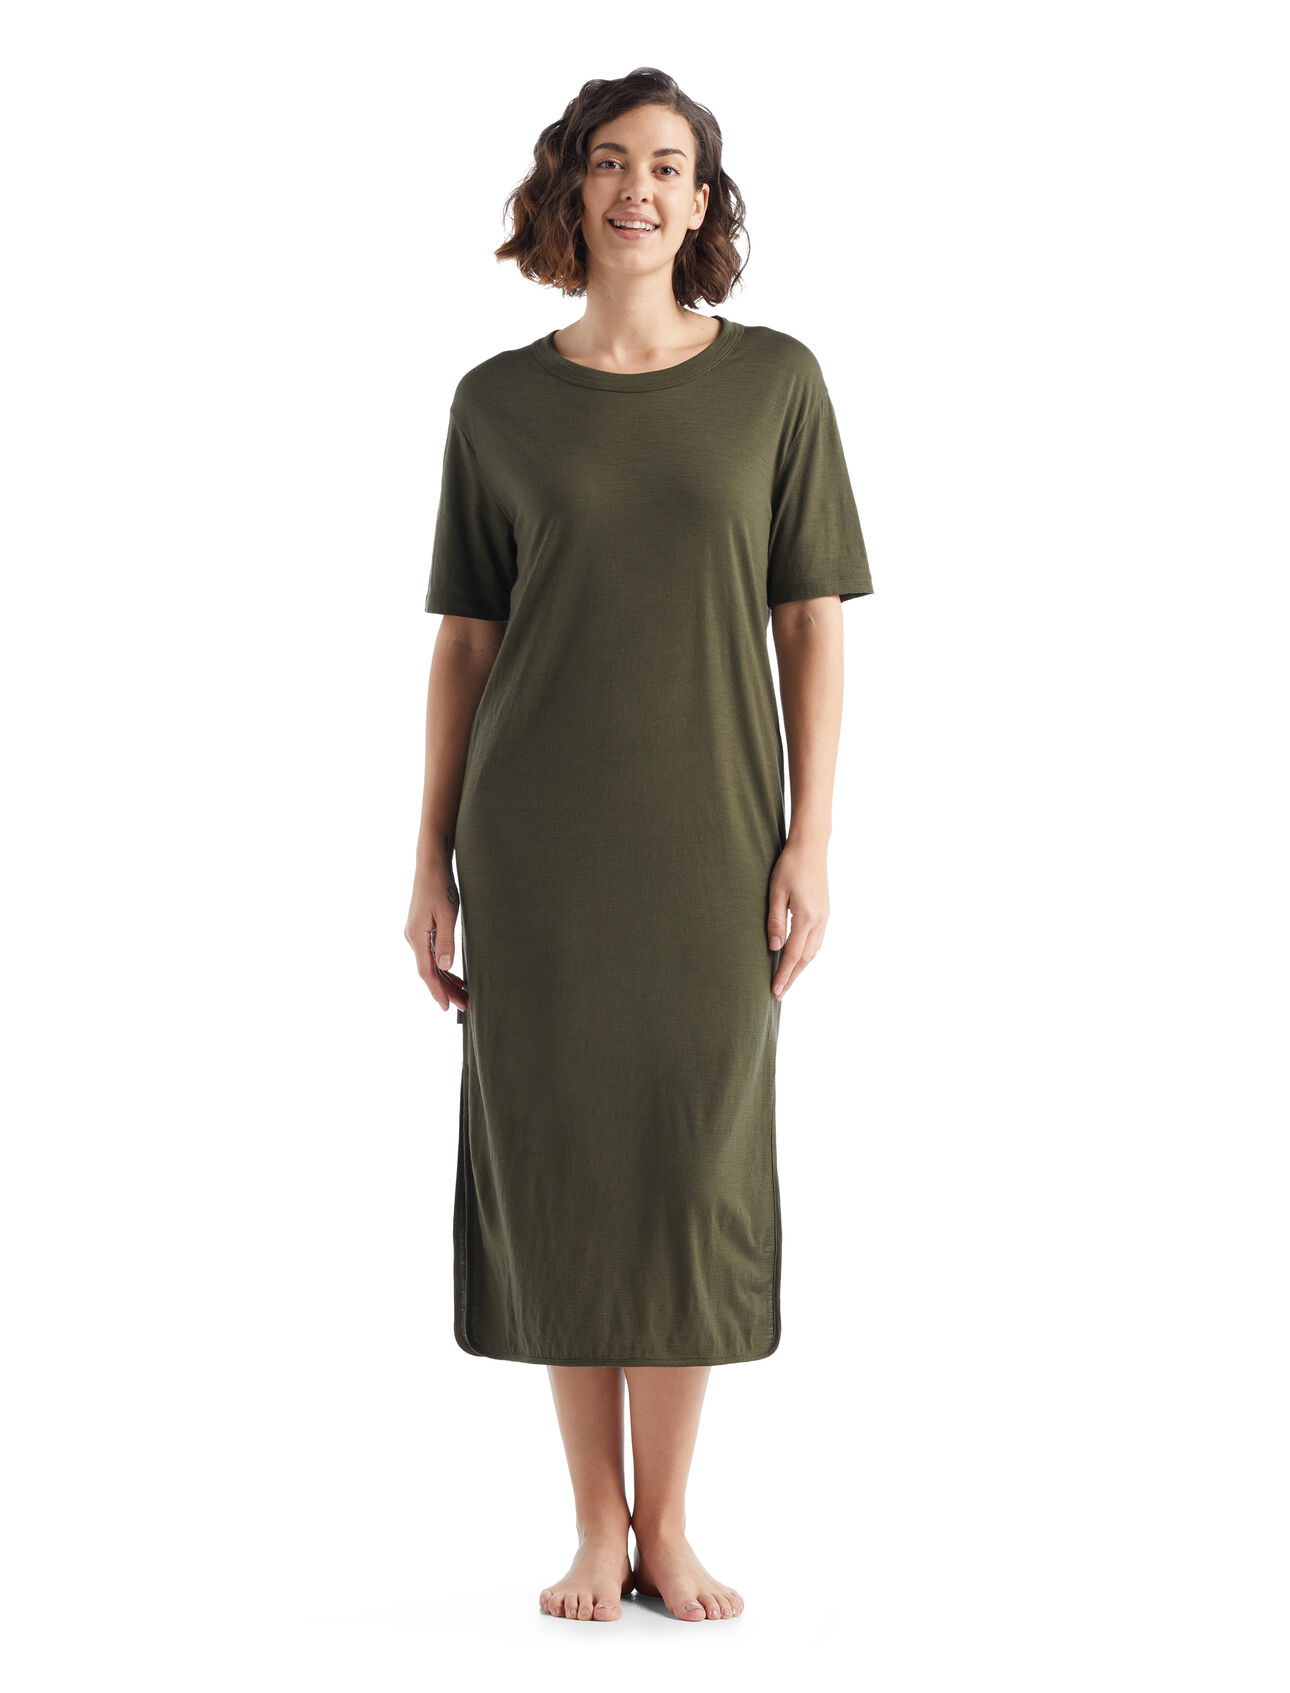 Womens Merino Granary Dress A stylish midi tee dress perfect for lounging or casual everyday excursions, the Granary Tee Dress features soft and breathable 100% merino wool fabric for comfort and style.